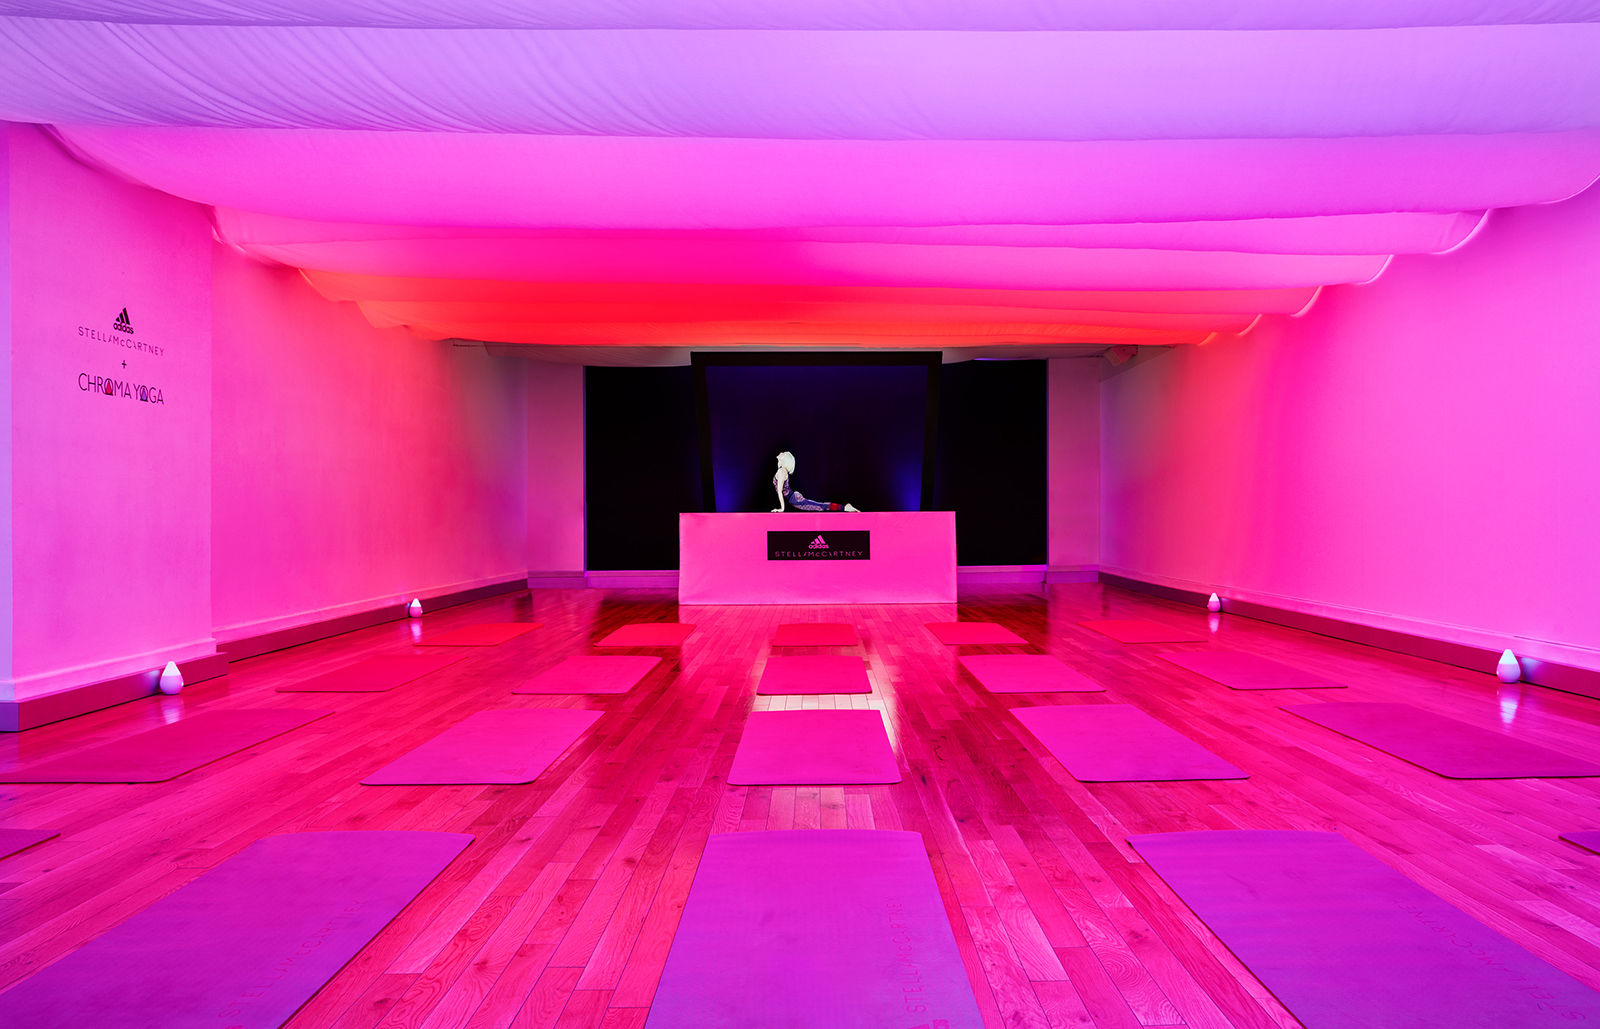 A pink and red lit space set up with yoga mats and a hologram instructor at the front of the room.